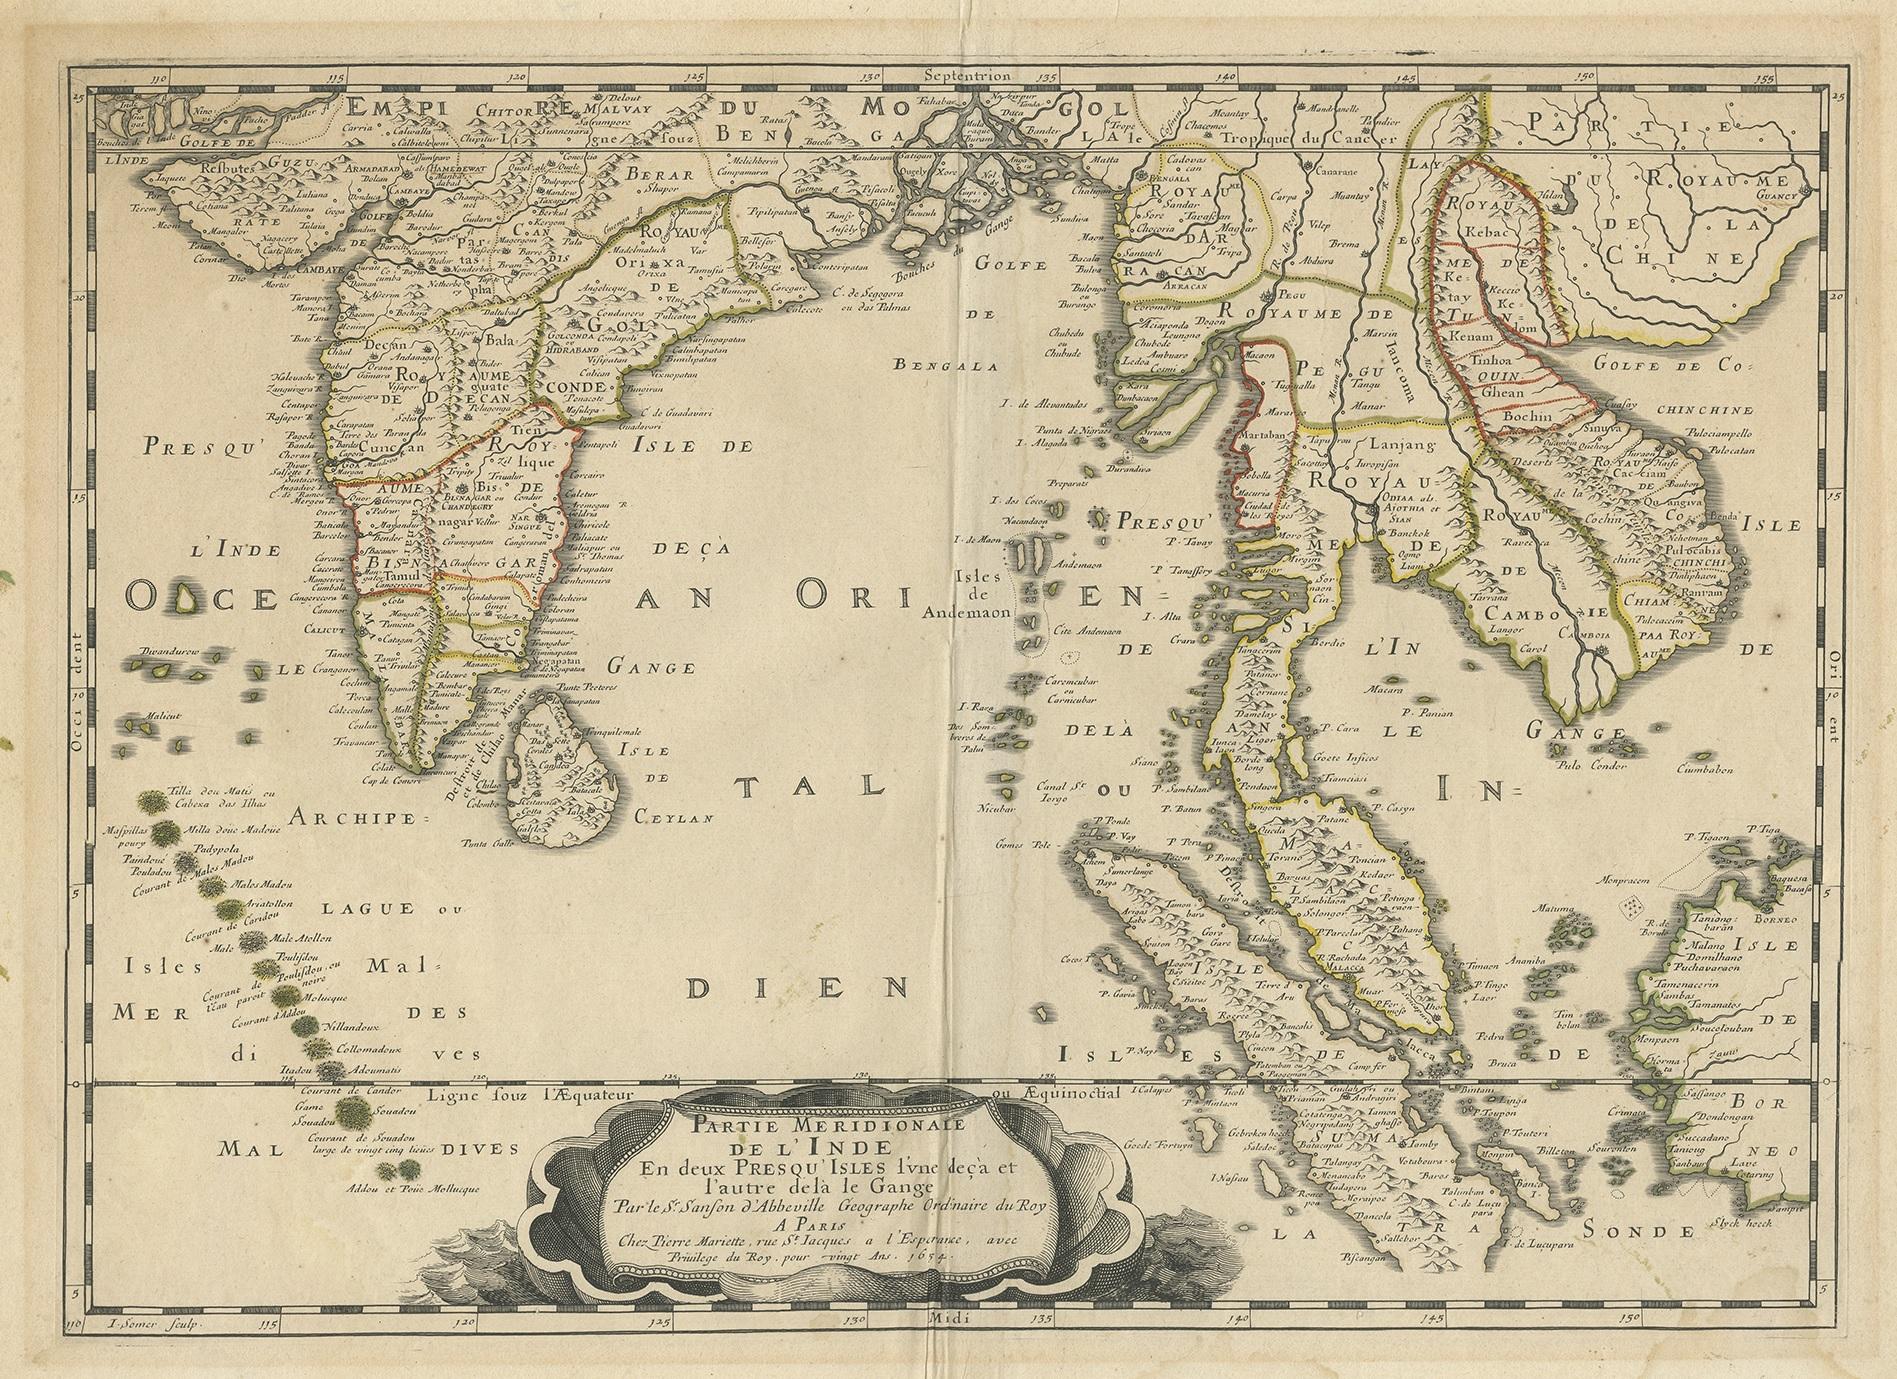 Antique map titled 'artie Meridionale de l'Inde en Deux Presqu'Isles, l'une deca et l'autre dela le Gange (..)'. Early map of India and Southeast Asia. The map shows most of modern India, Bangladesh and Burma, the whole of Sri Lanka, Thailand,